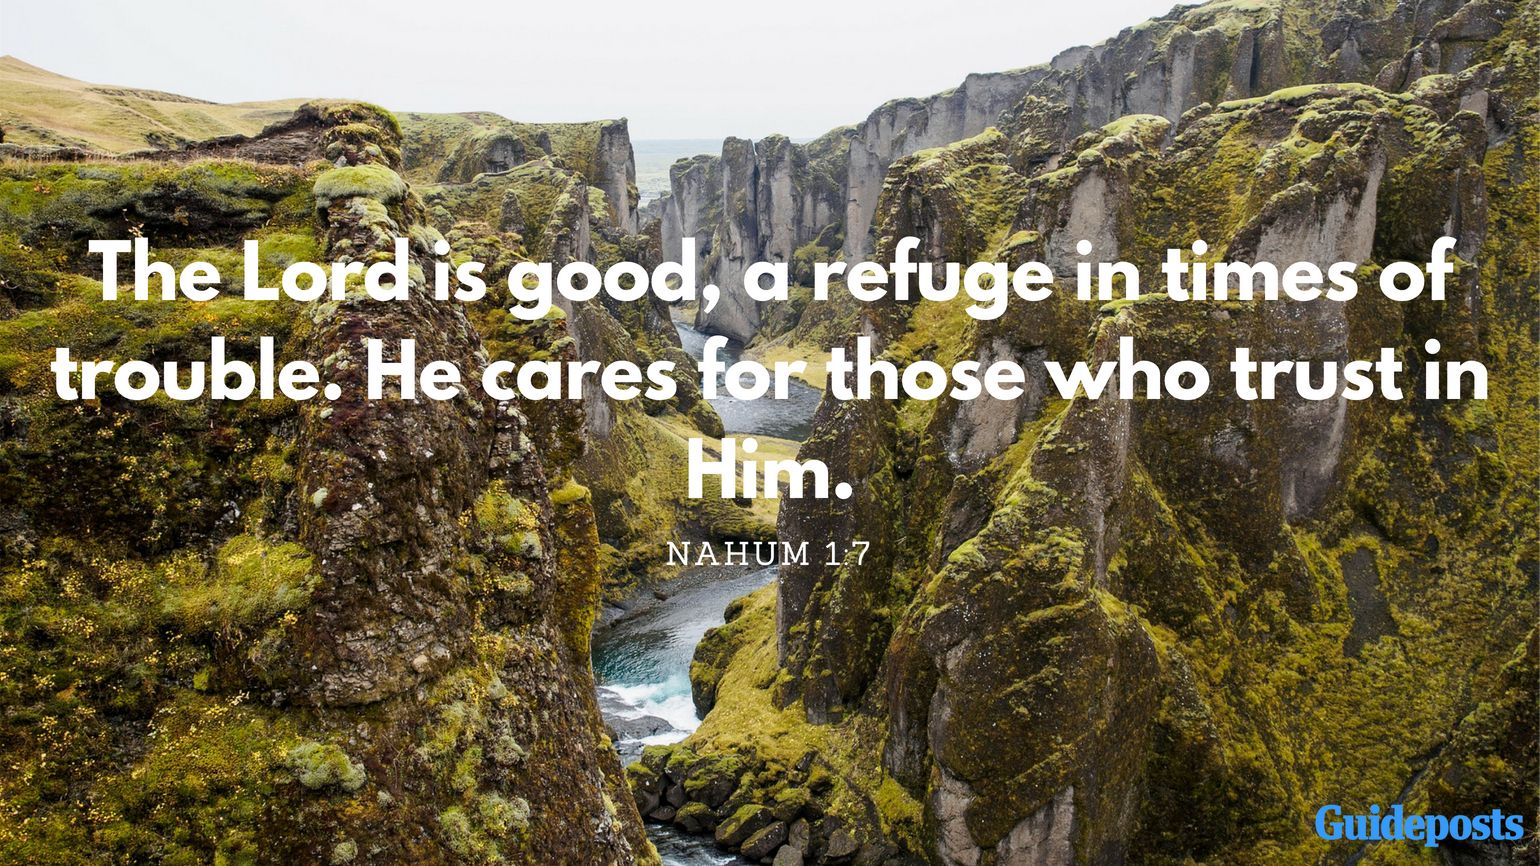 The Lord is good, a refuge in times of trouble. He cares for those who trust in Him. Nahum 1:7